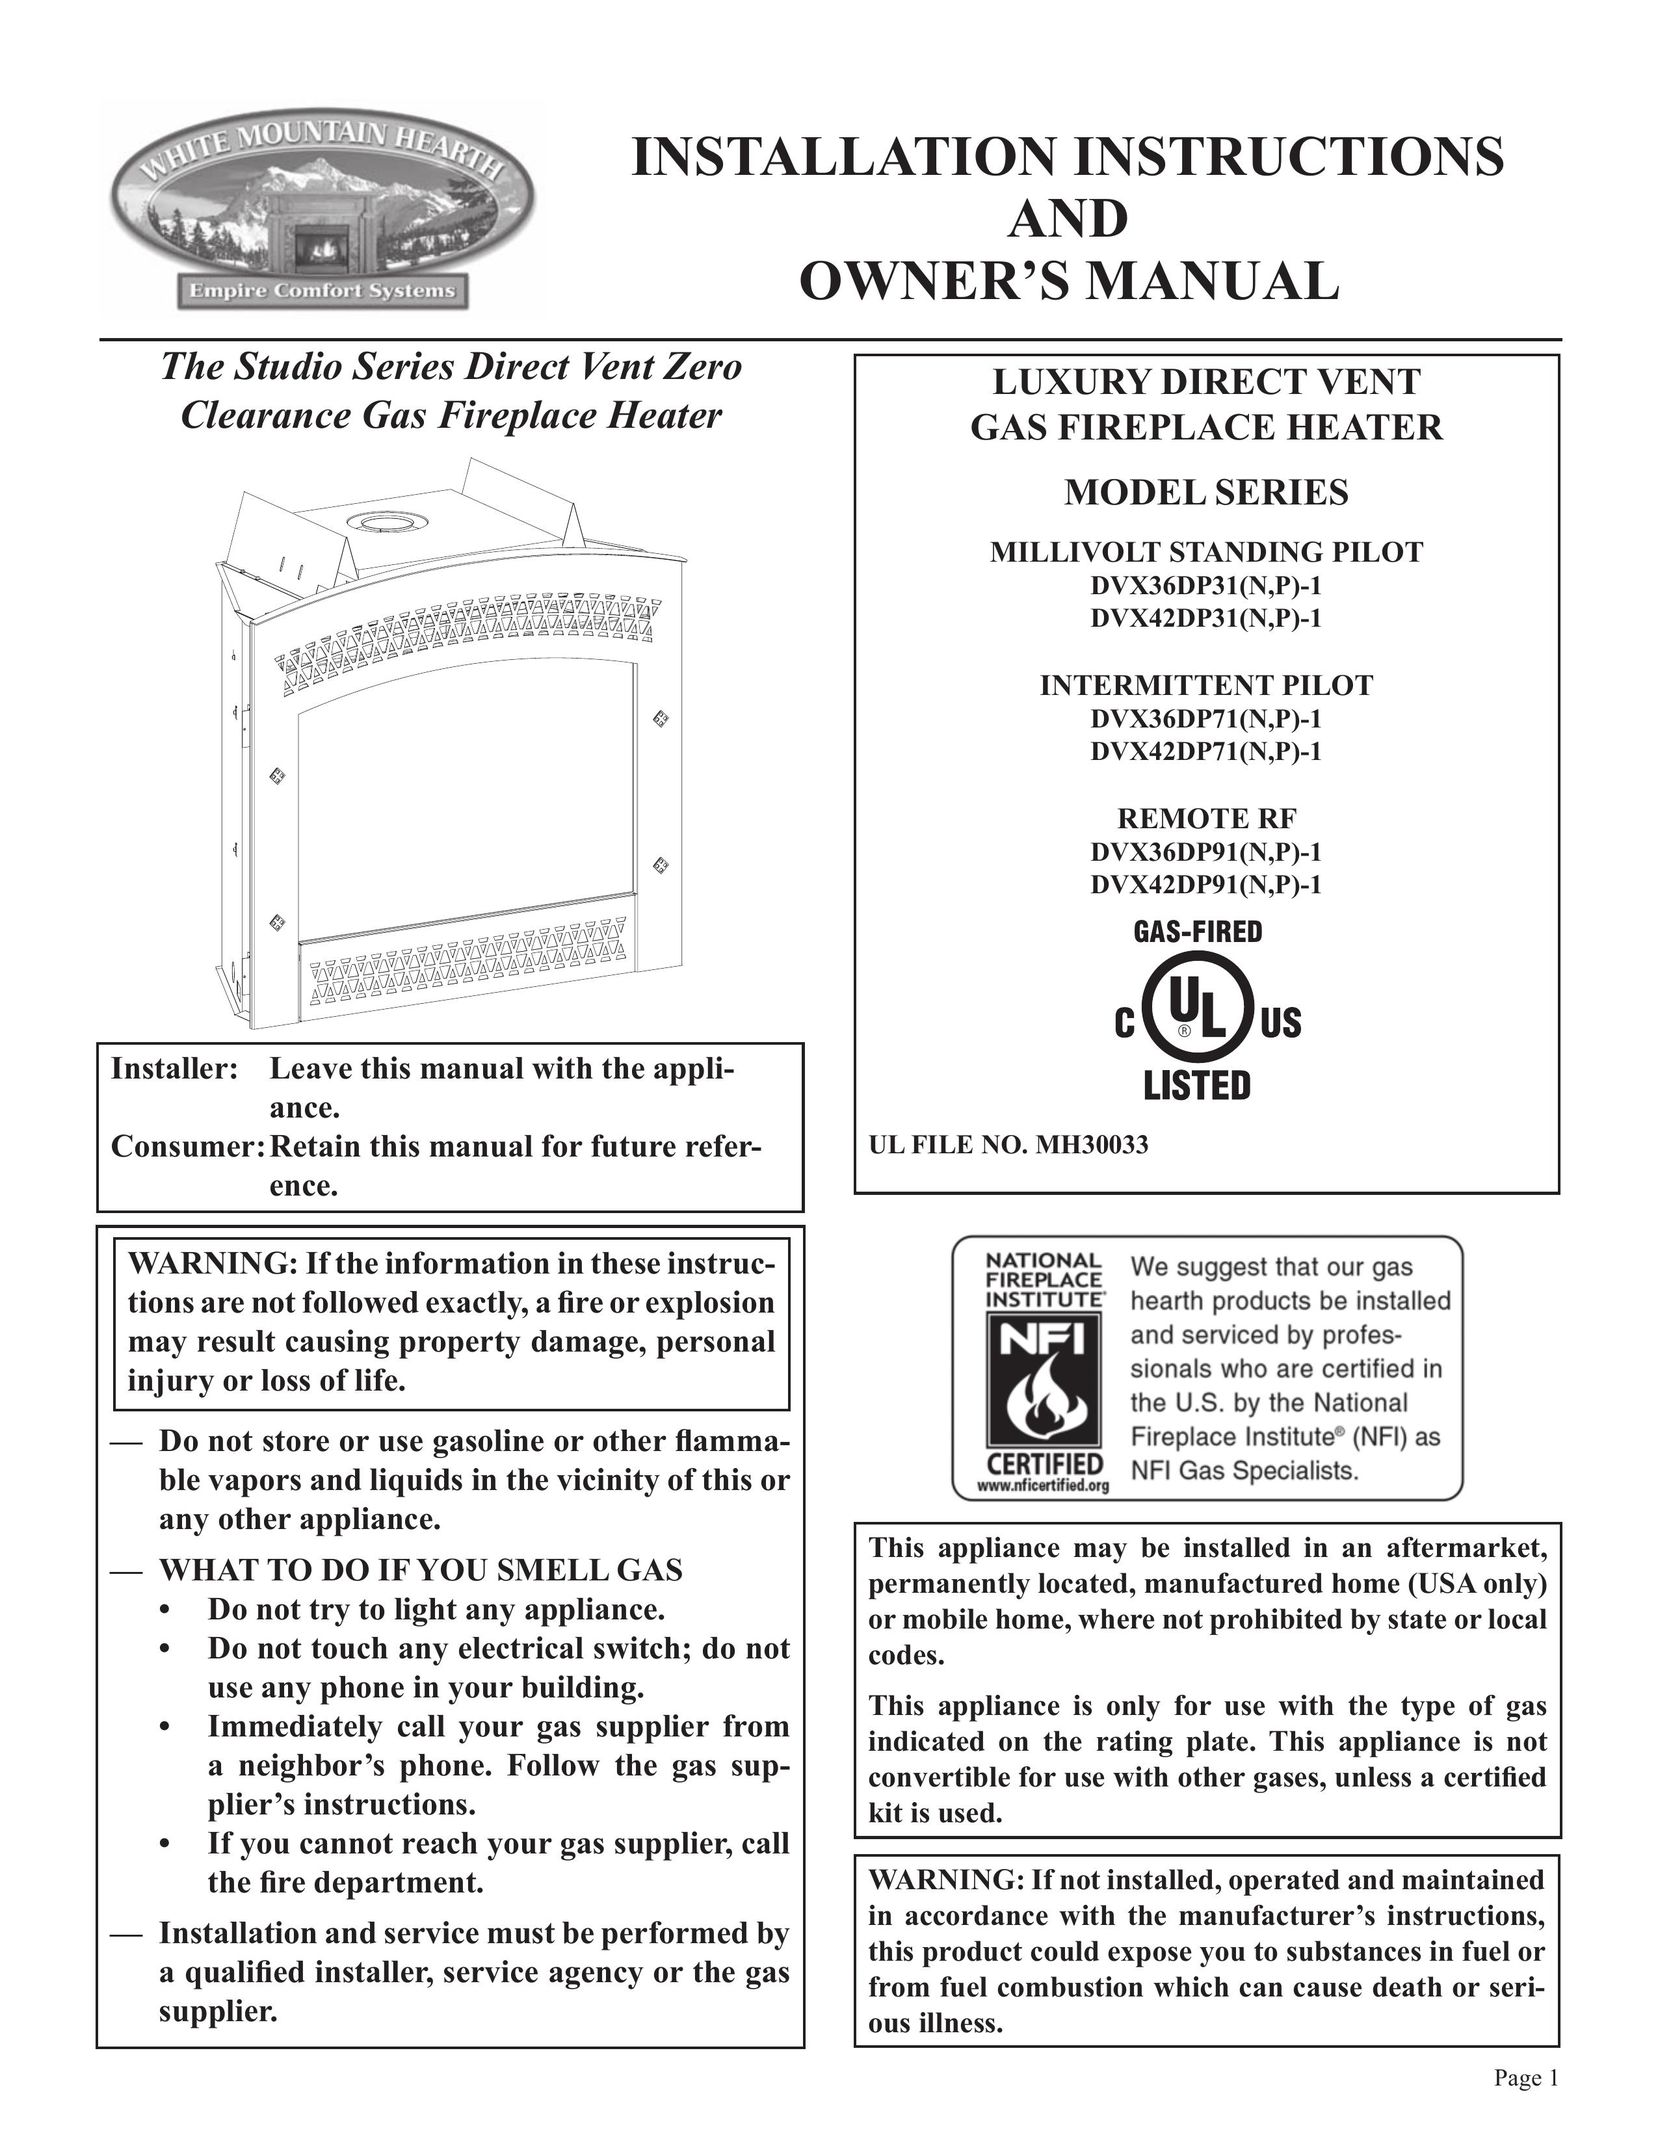 Empire Comfort Systems DVX36DP31(N,P)-1 Gas Heater User Manual